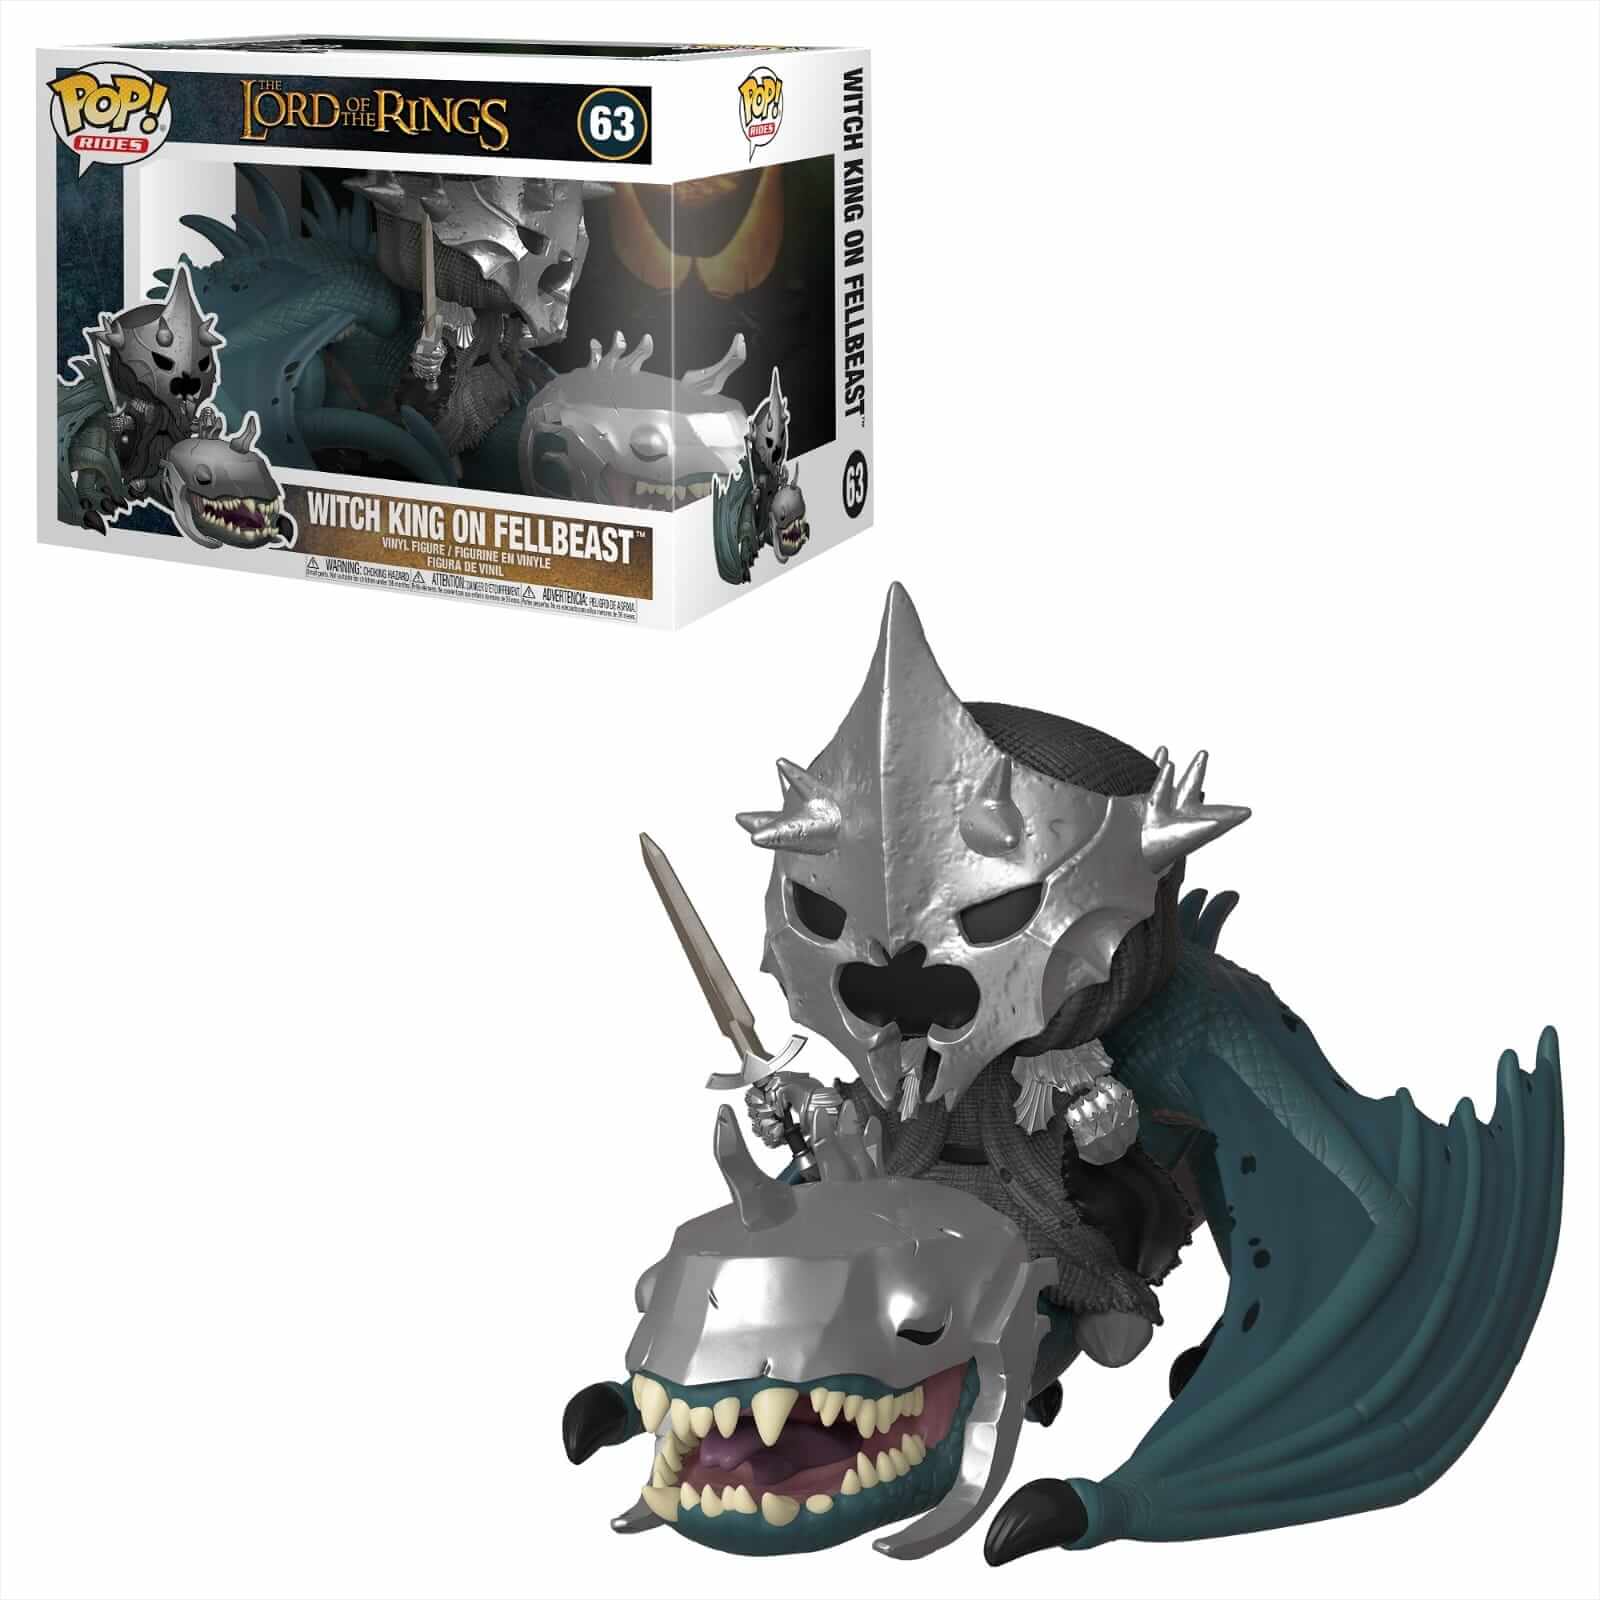 new funko pop lord of the rings